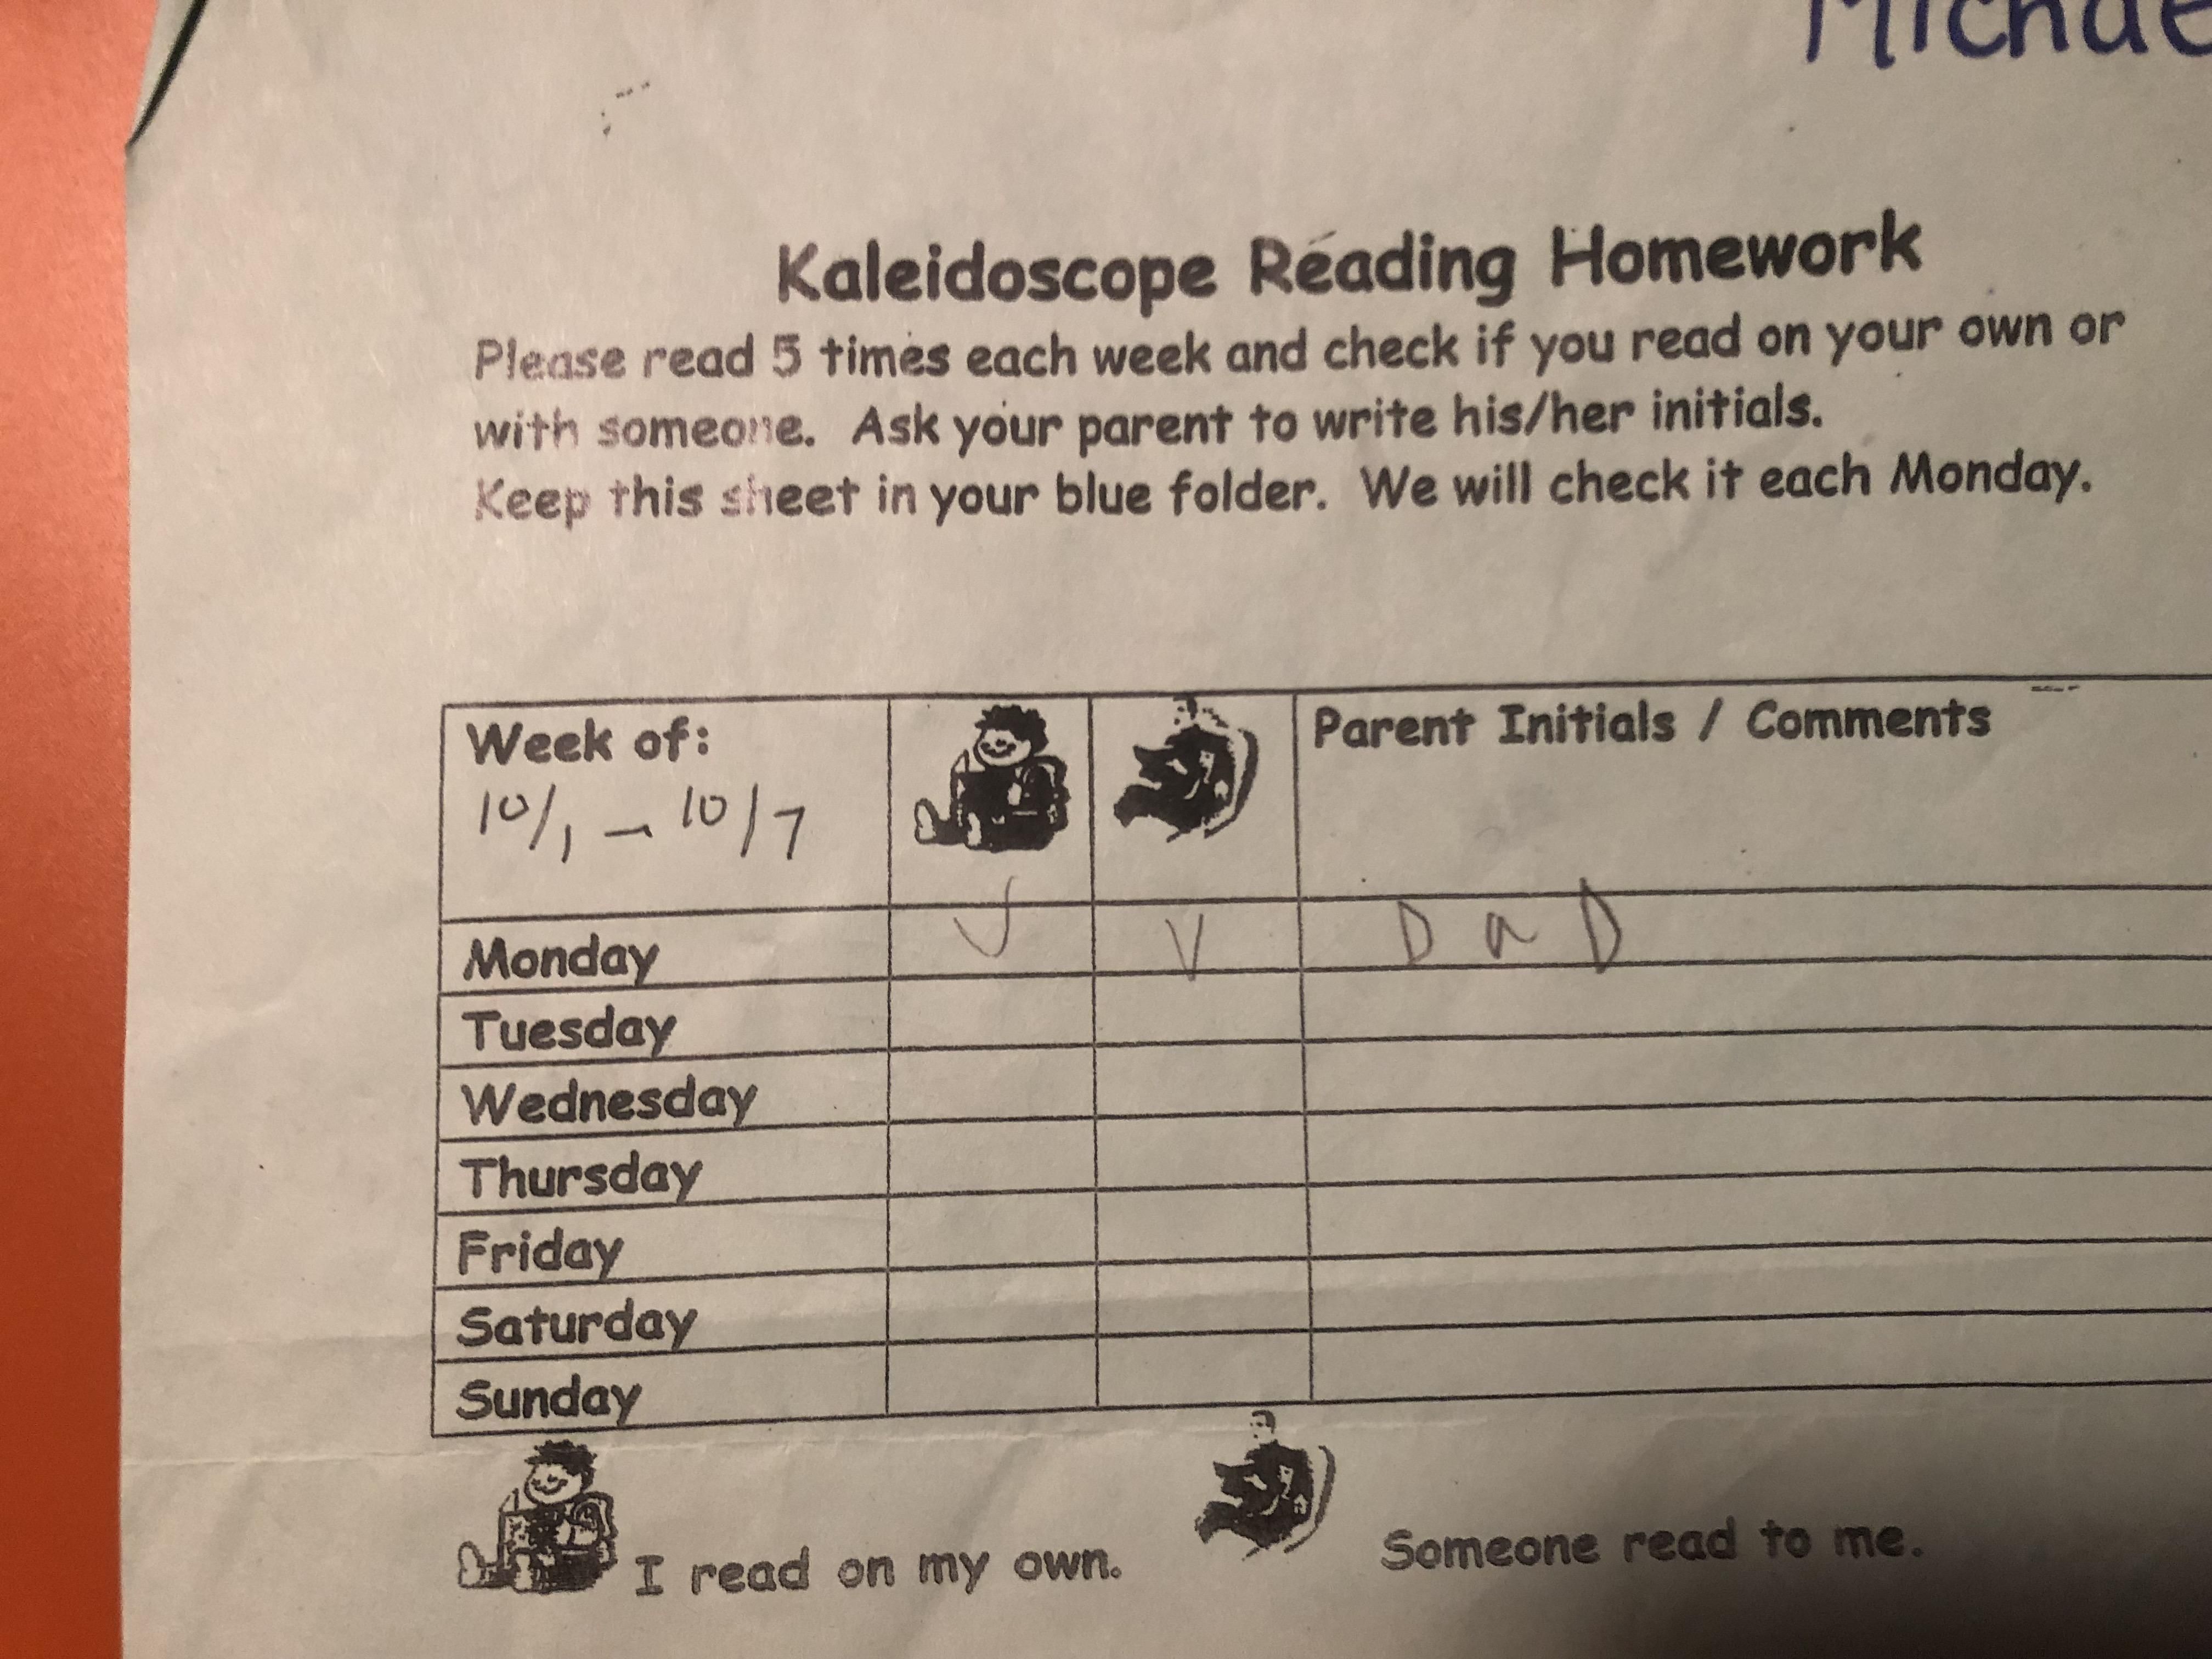 My son forged my signature on his homework.